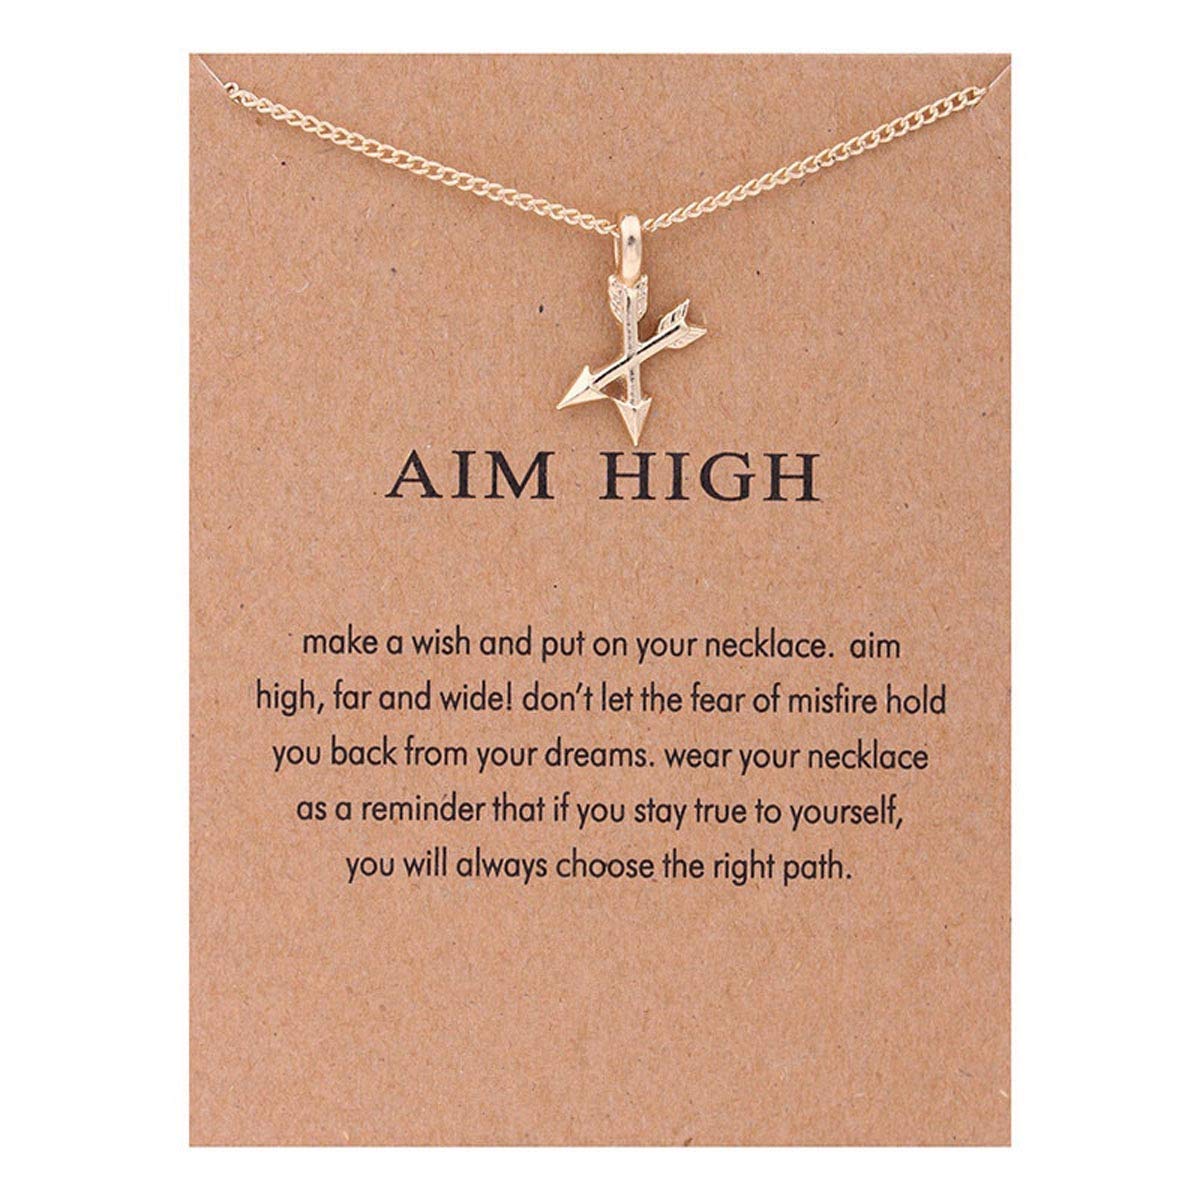 Rack Jack Charm Pendant Necklace with Wish Card aim high - Gold Colour for Women